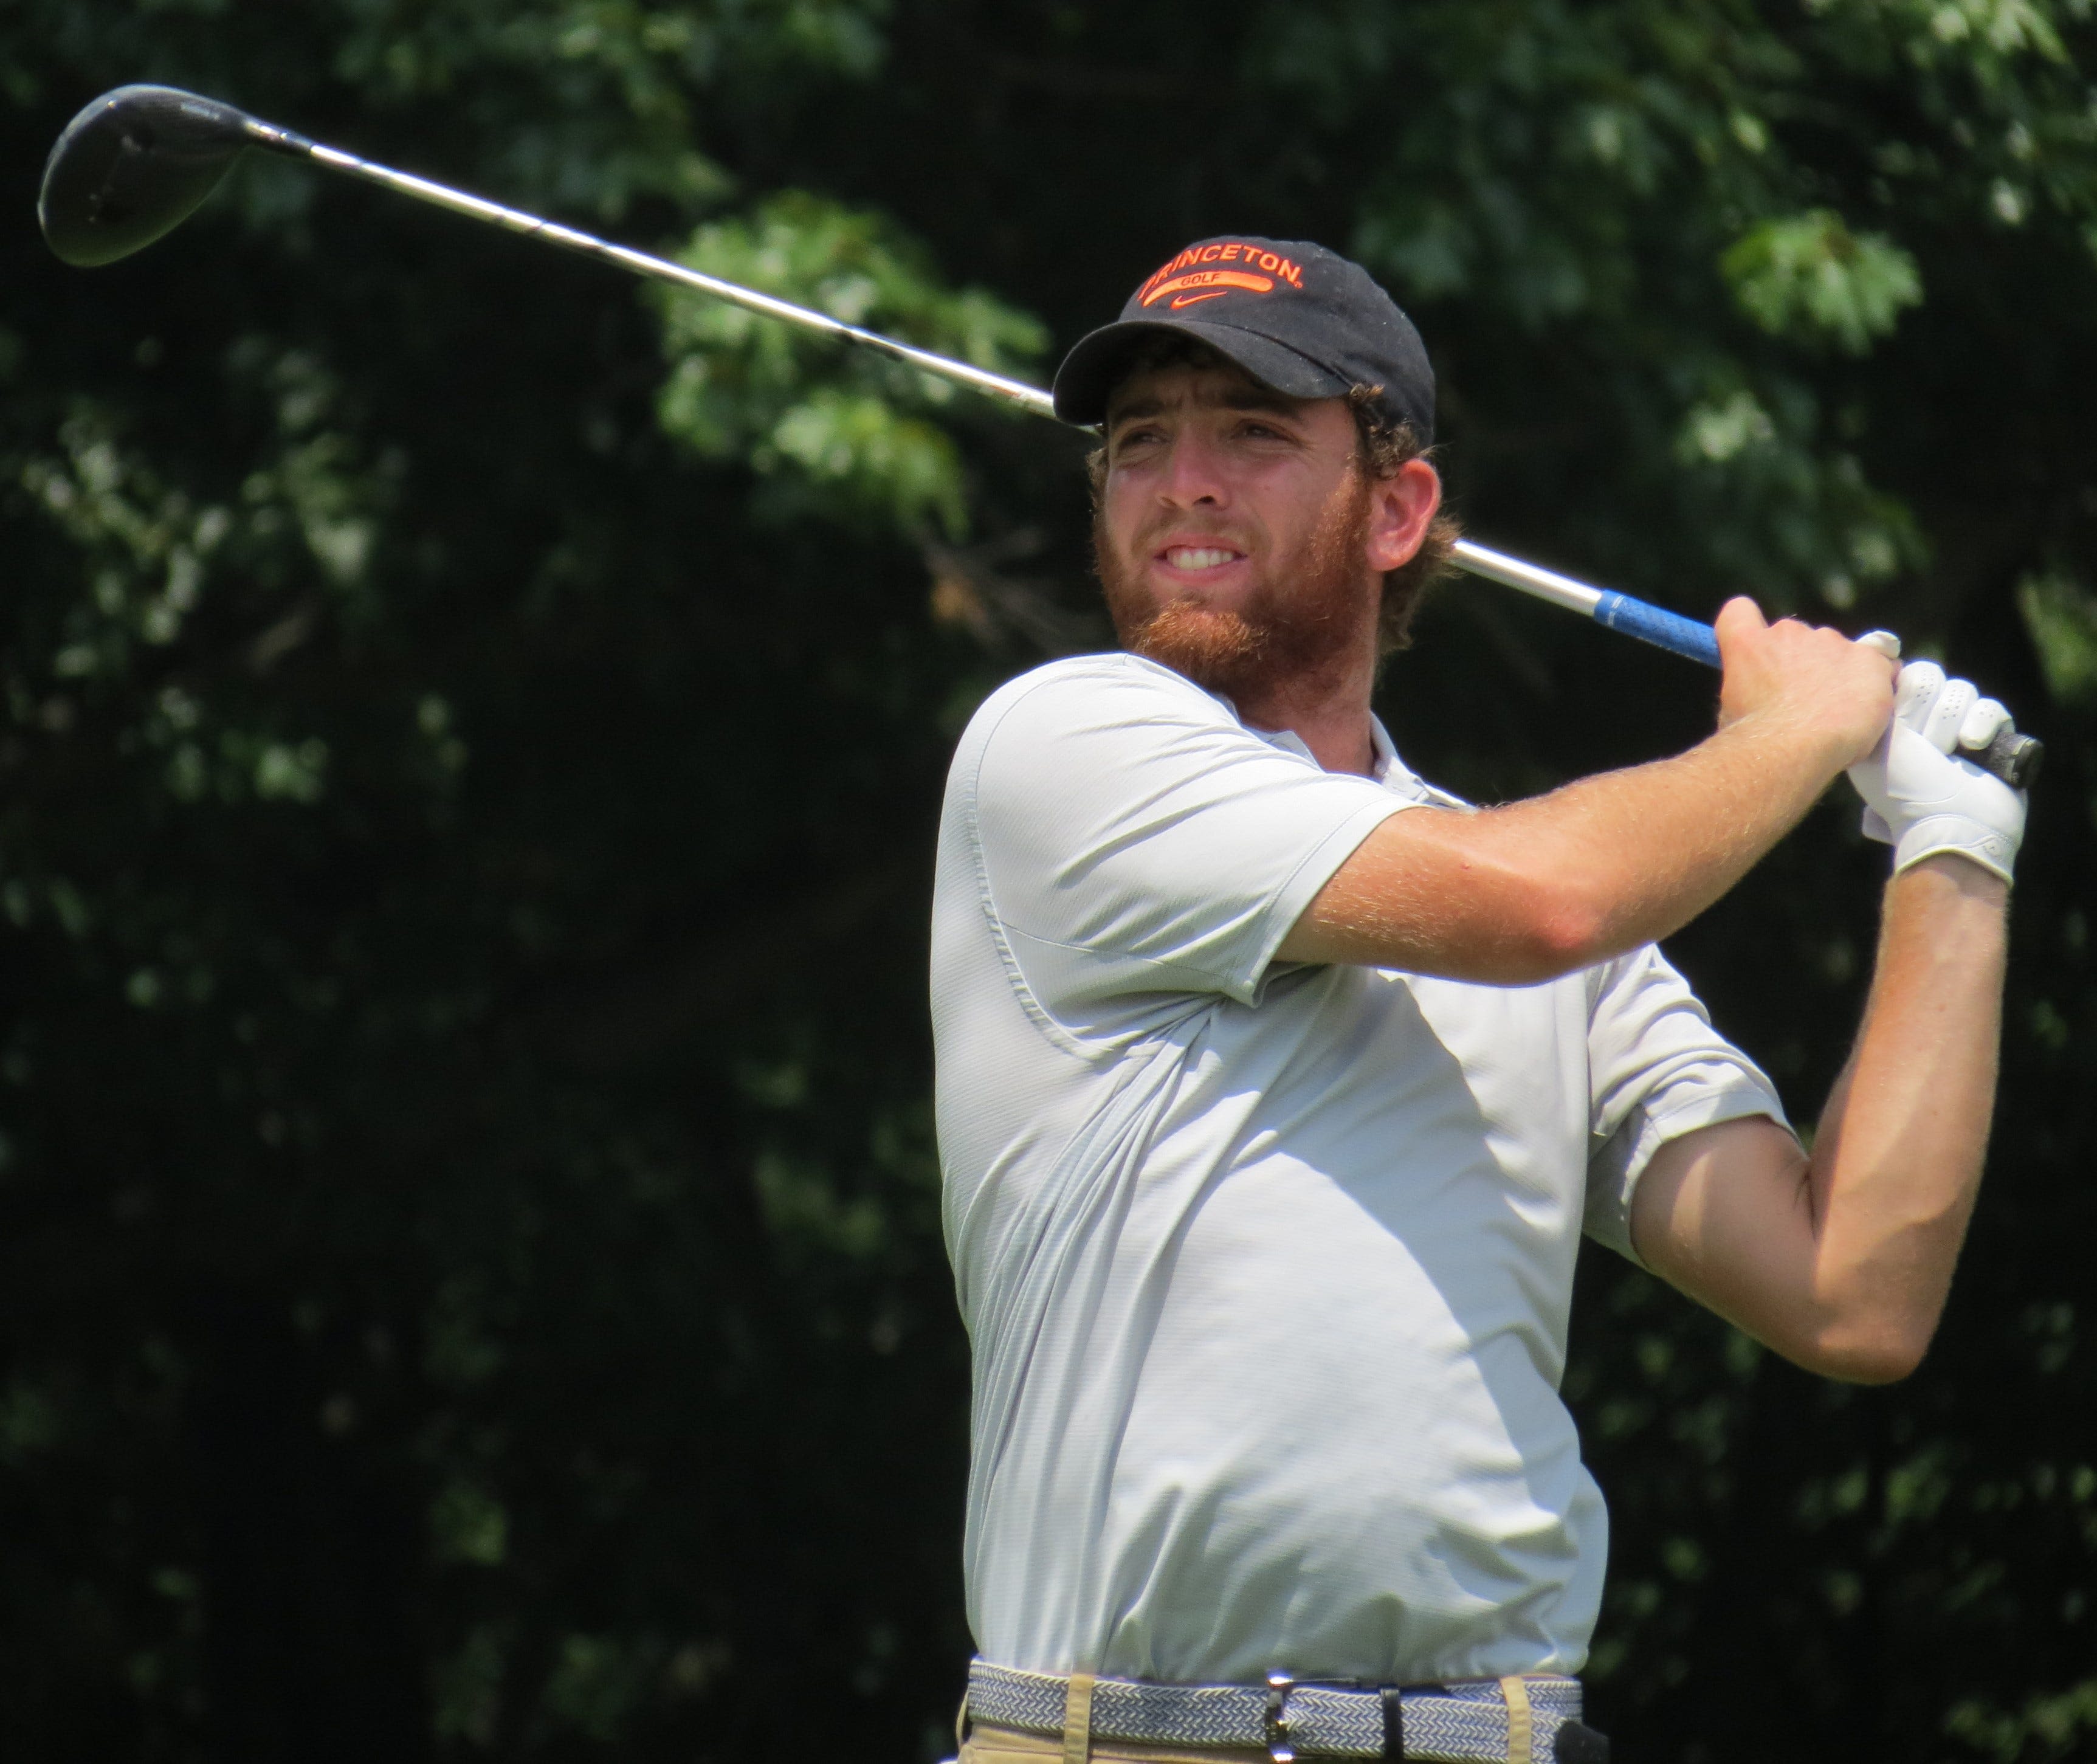 Familiar names atop the leaderboard early at 123rd New Jersey Amateur Golf Championship